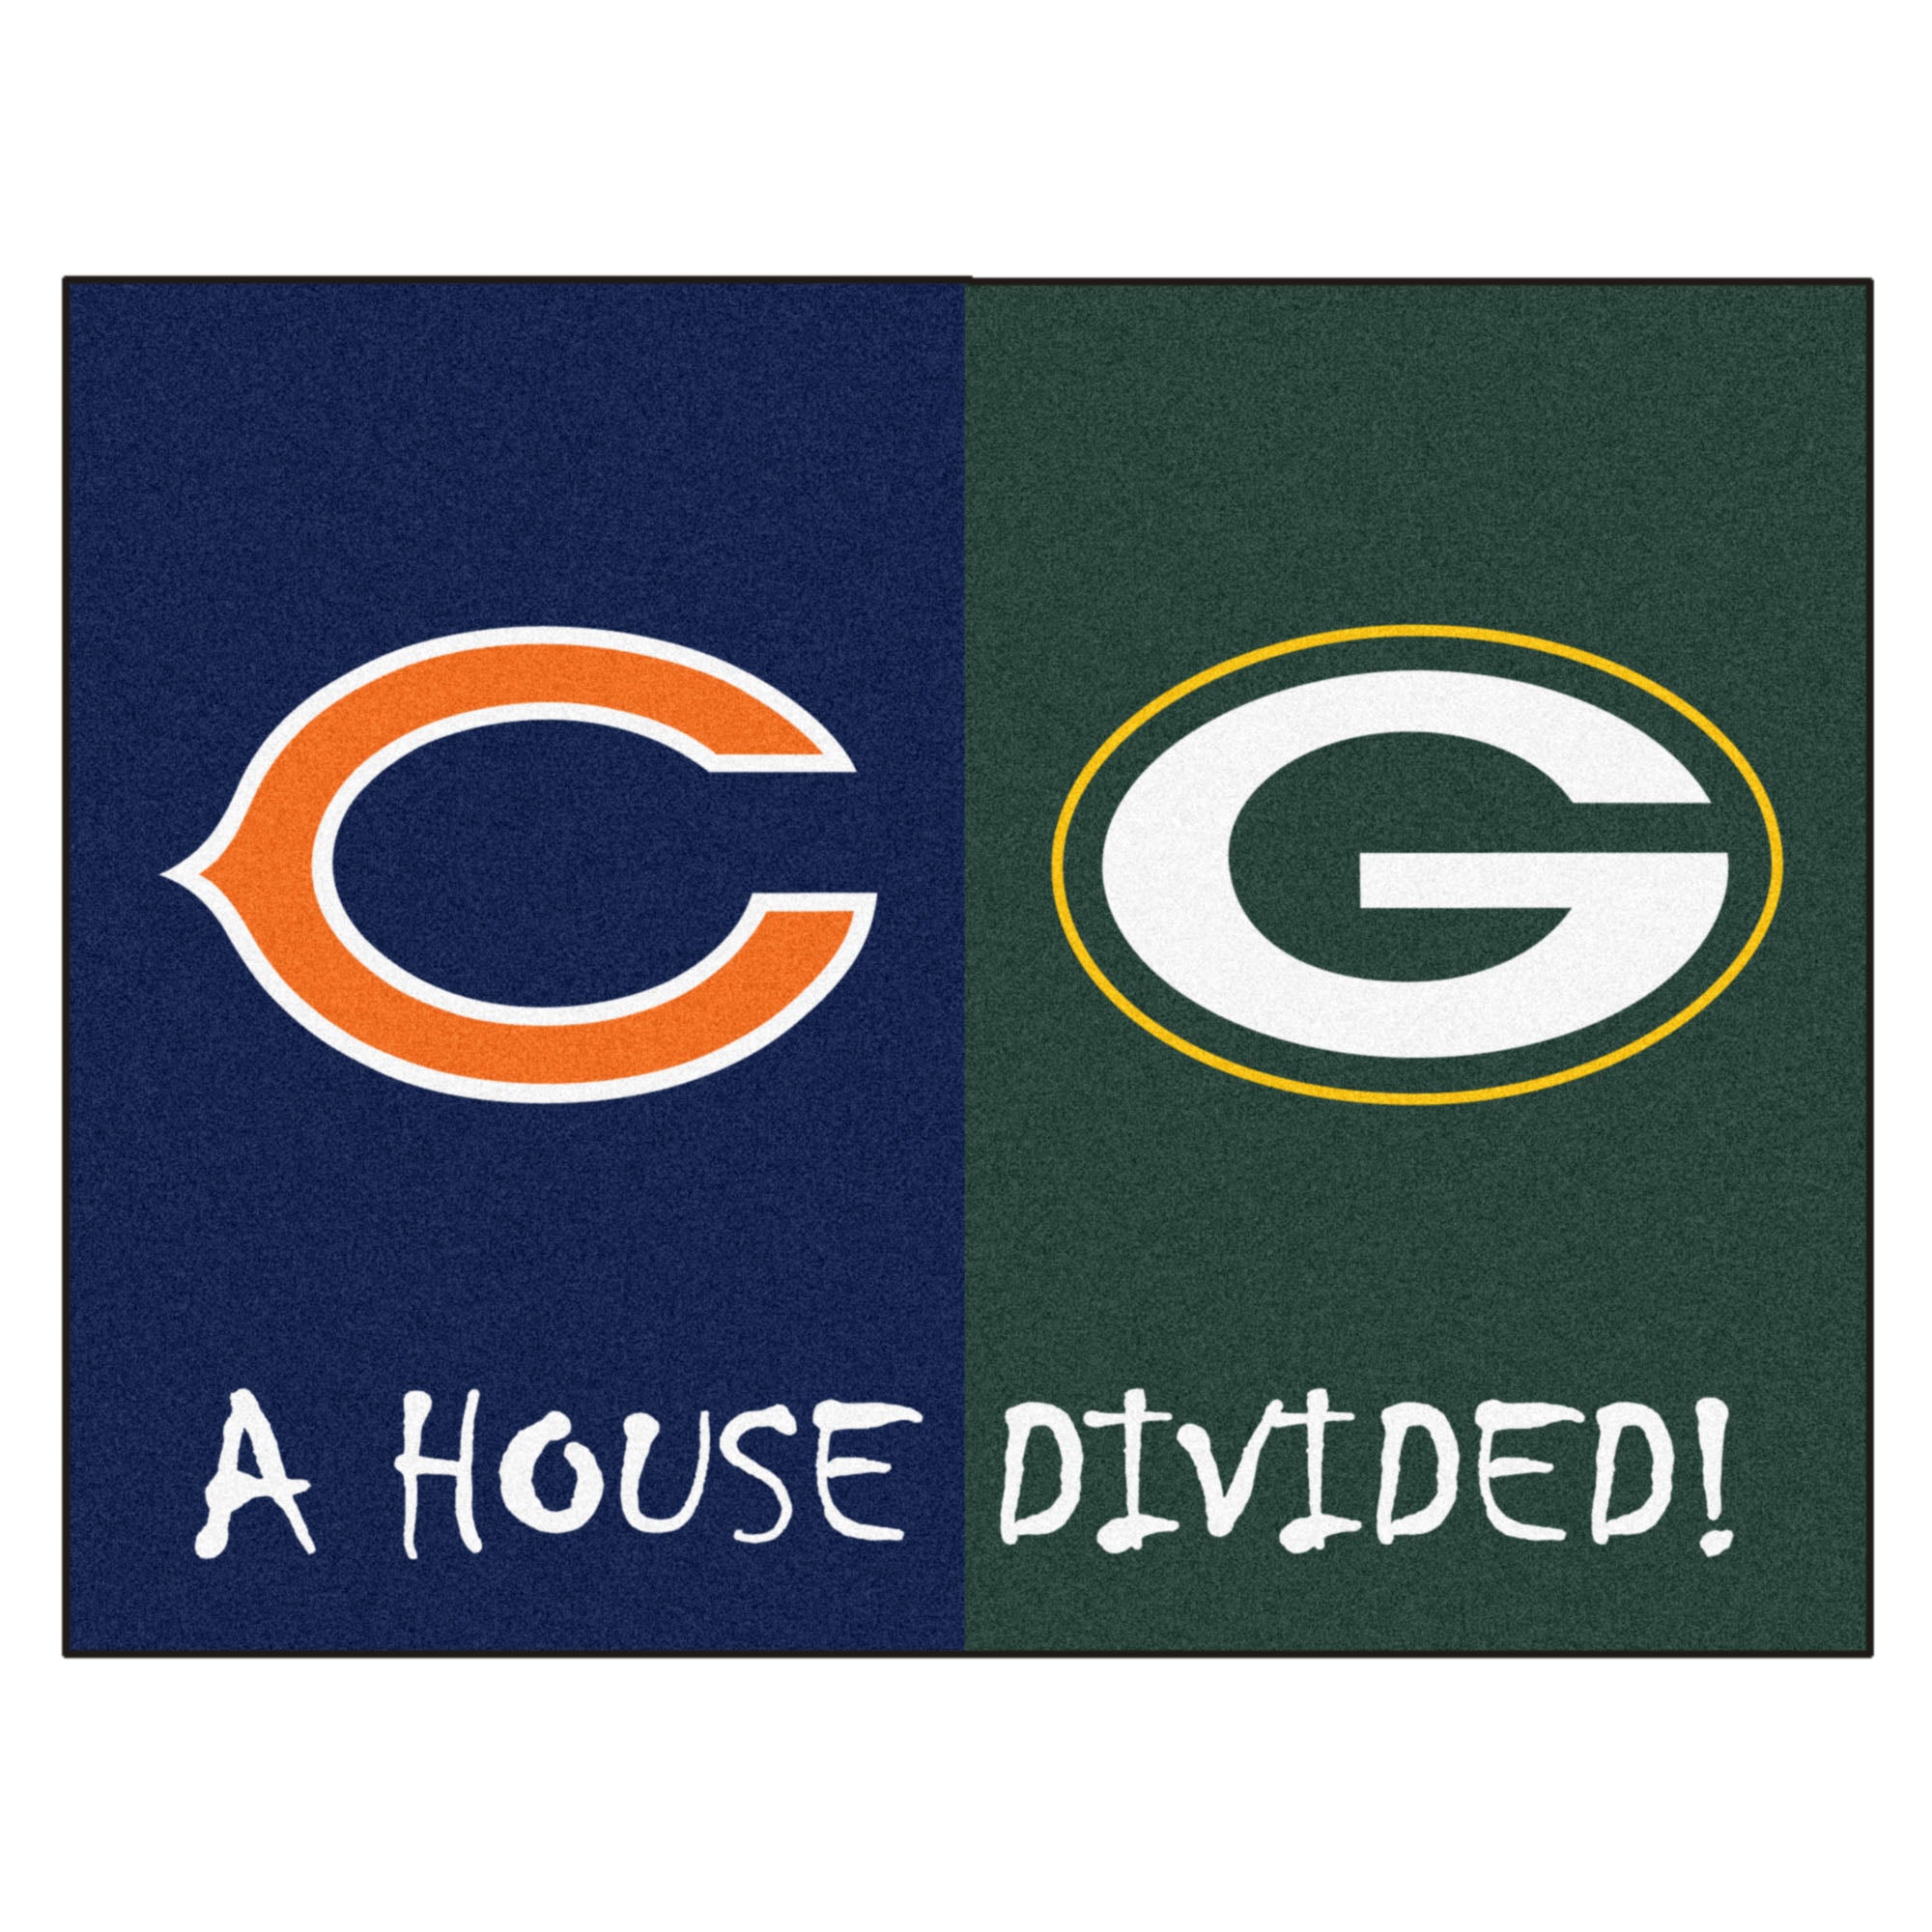 NFL House Divided - Bears / Packers House Divided Mat